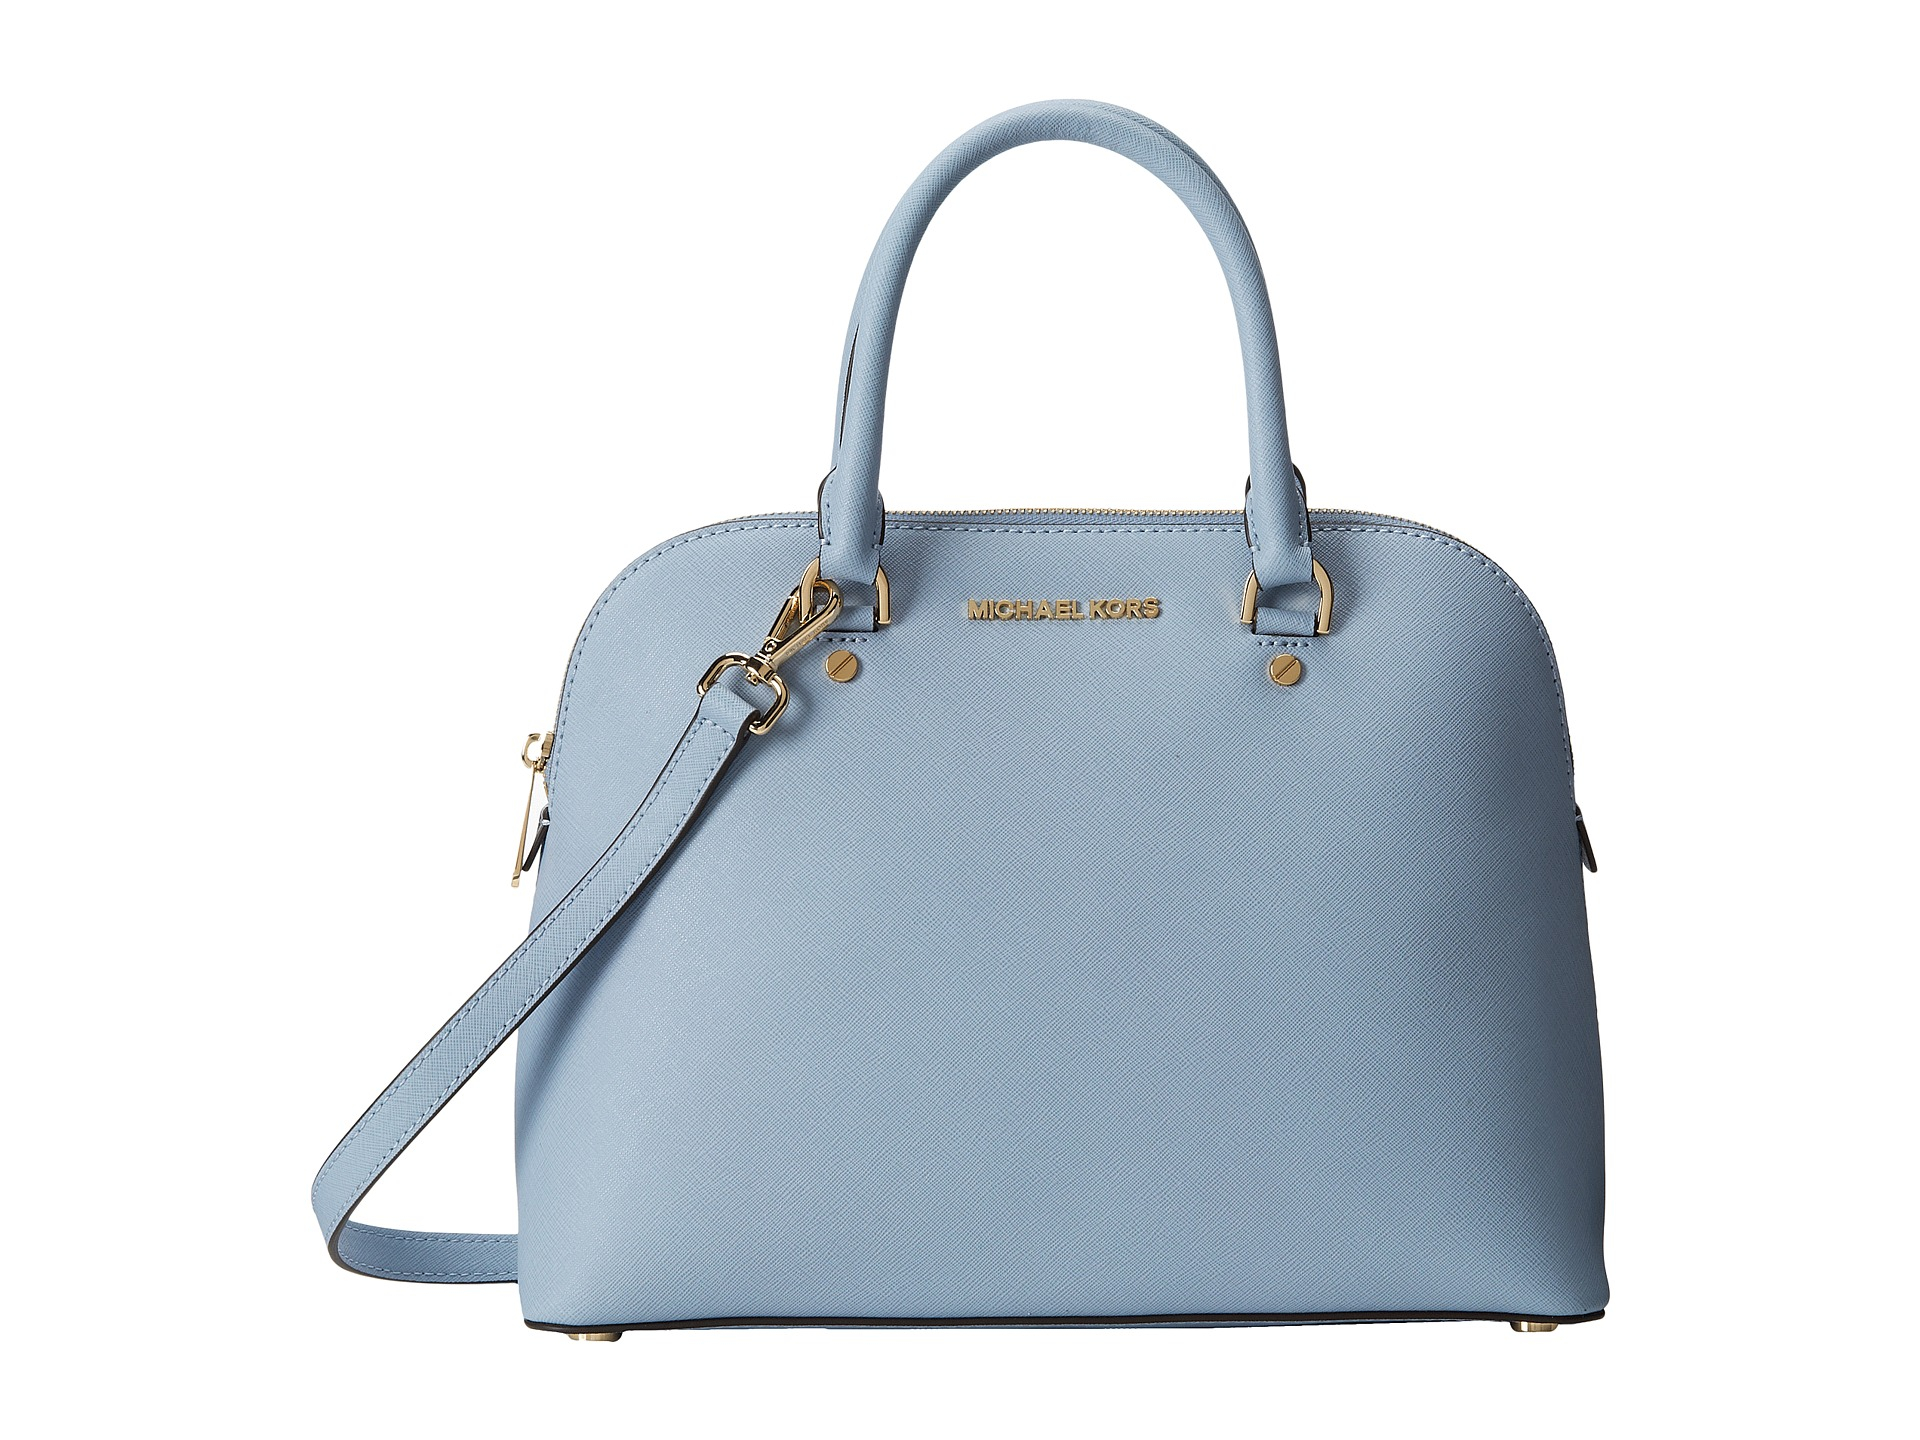 Ud over Peer Egnet MICHAEL Michael Kors Leather Cindy Large Dome Satchel in Pale Blue (Blue) -  Lyst